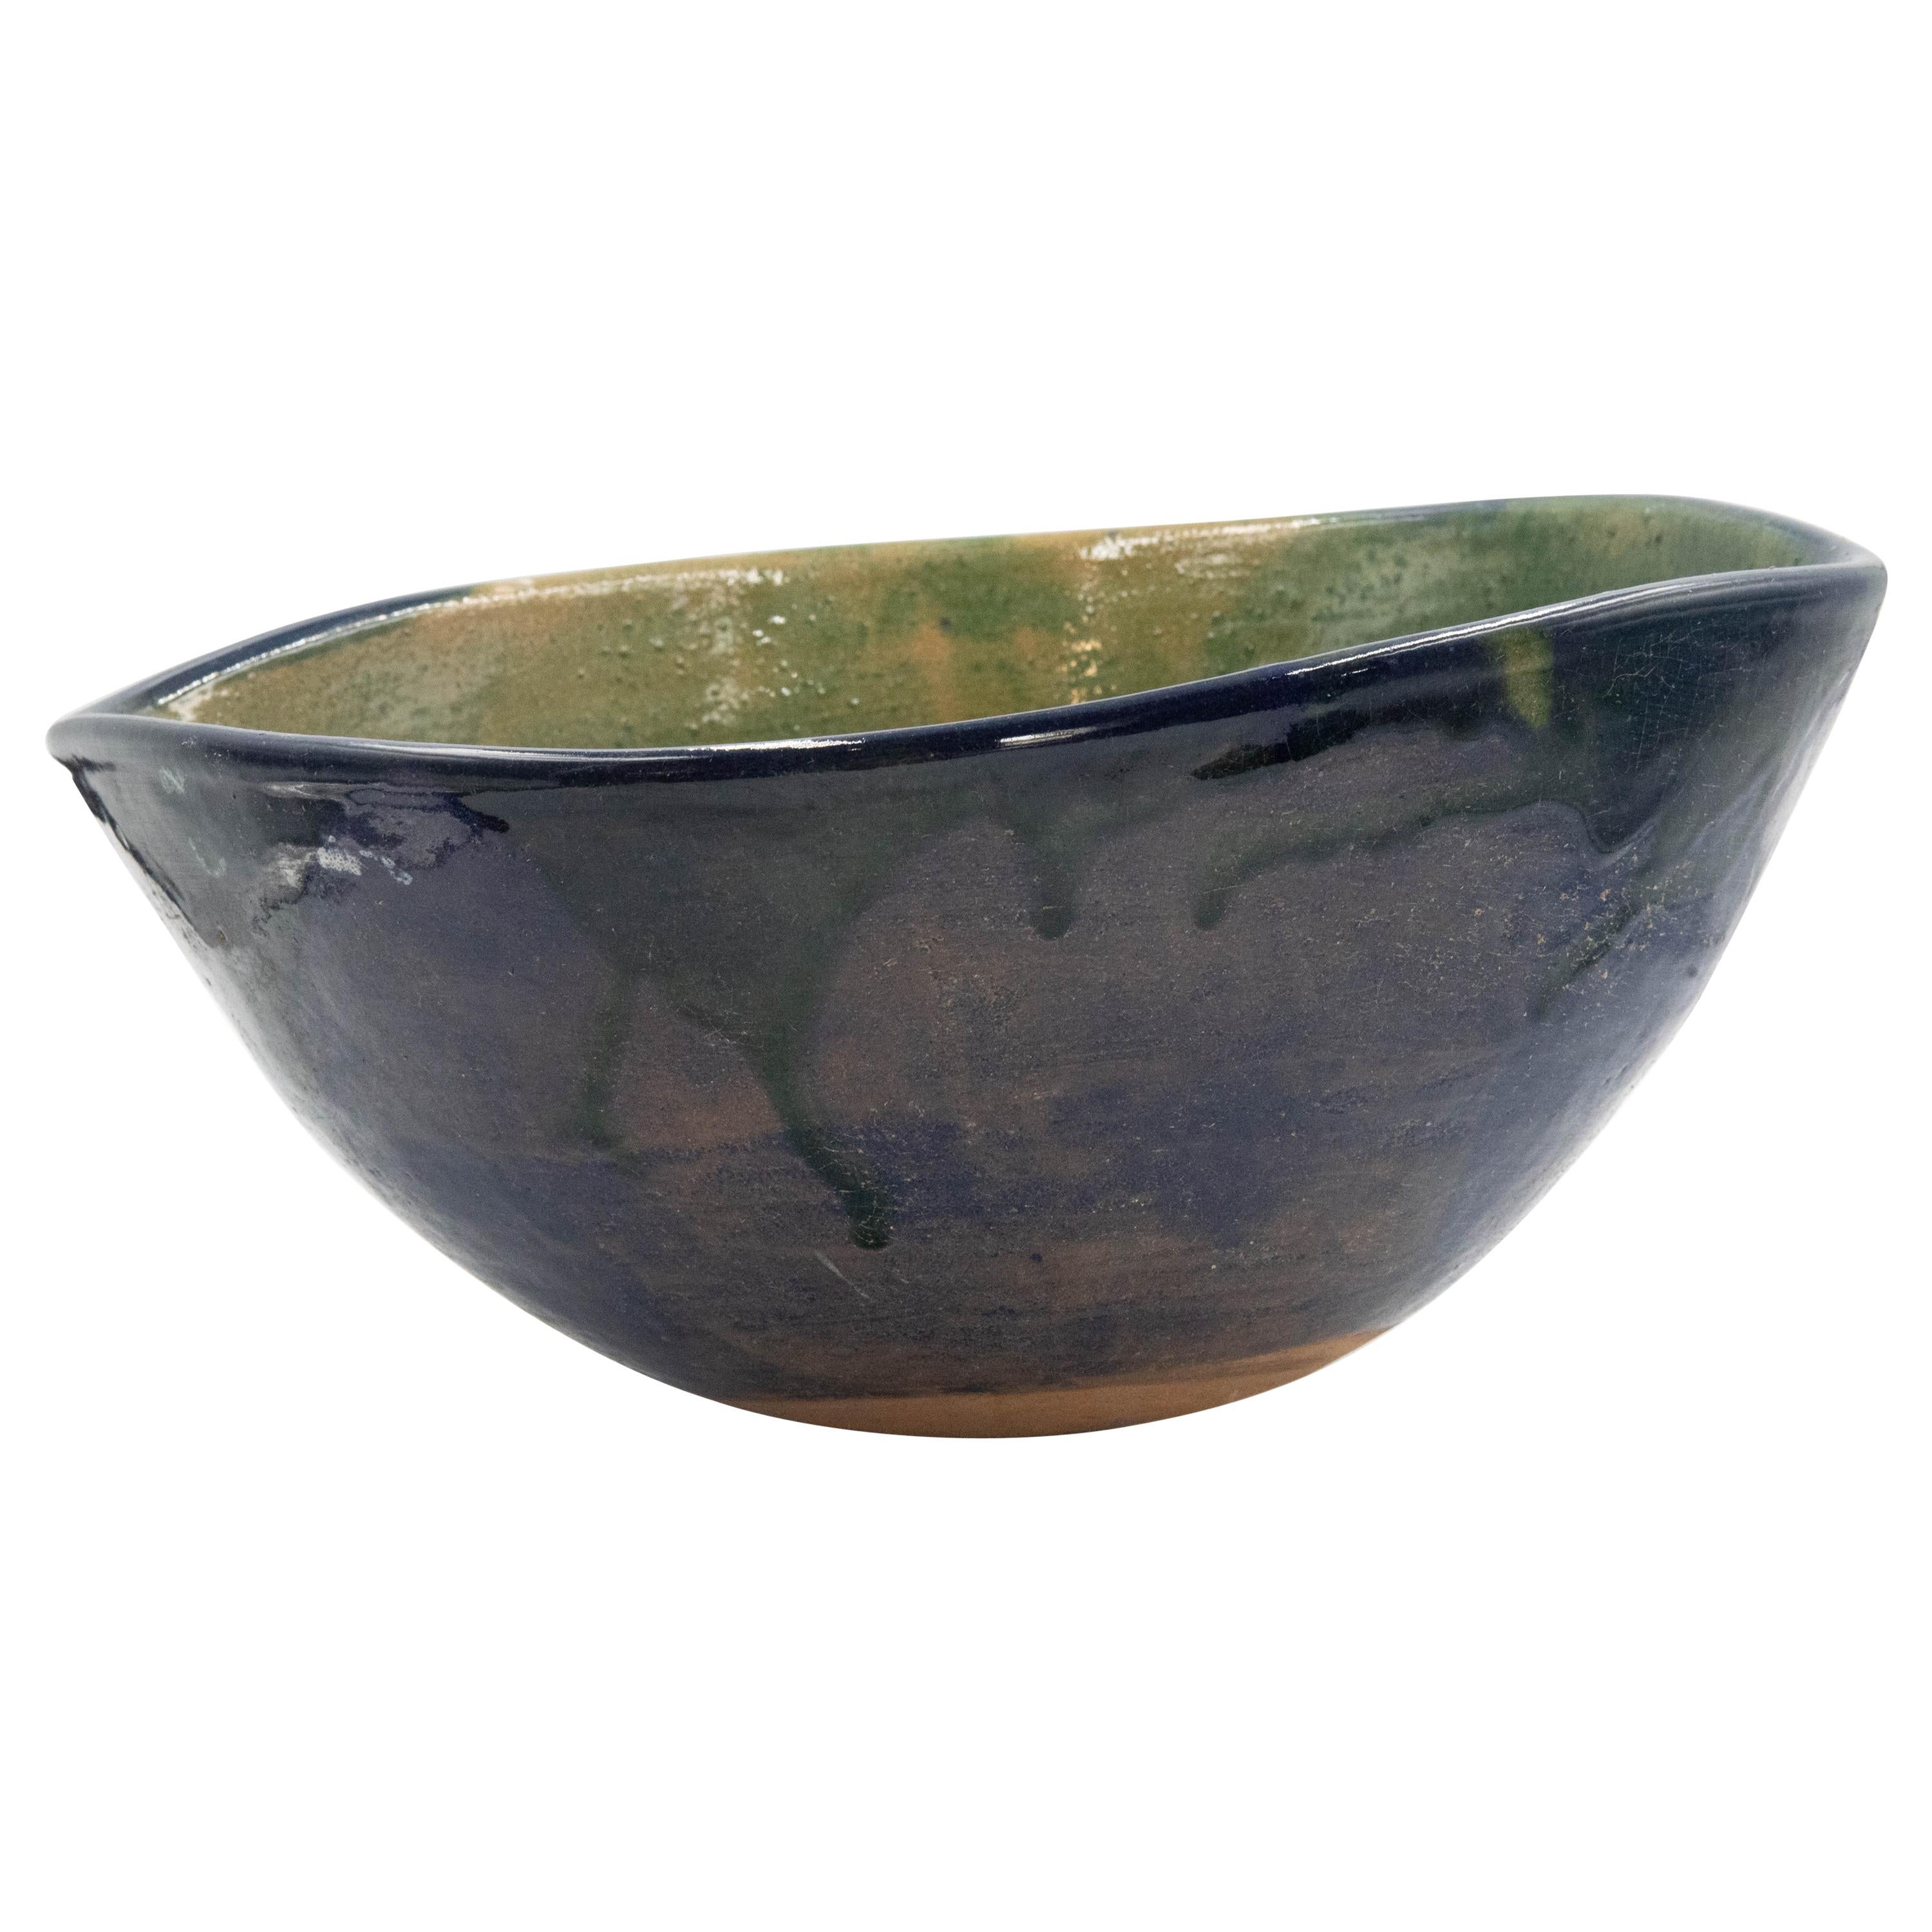 Mexican Fruit Bowl Ceramic Clay Lead Free Blue Green Contemporary Rustic Pottery